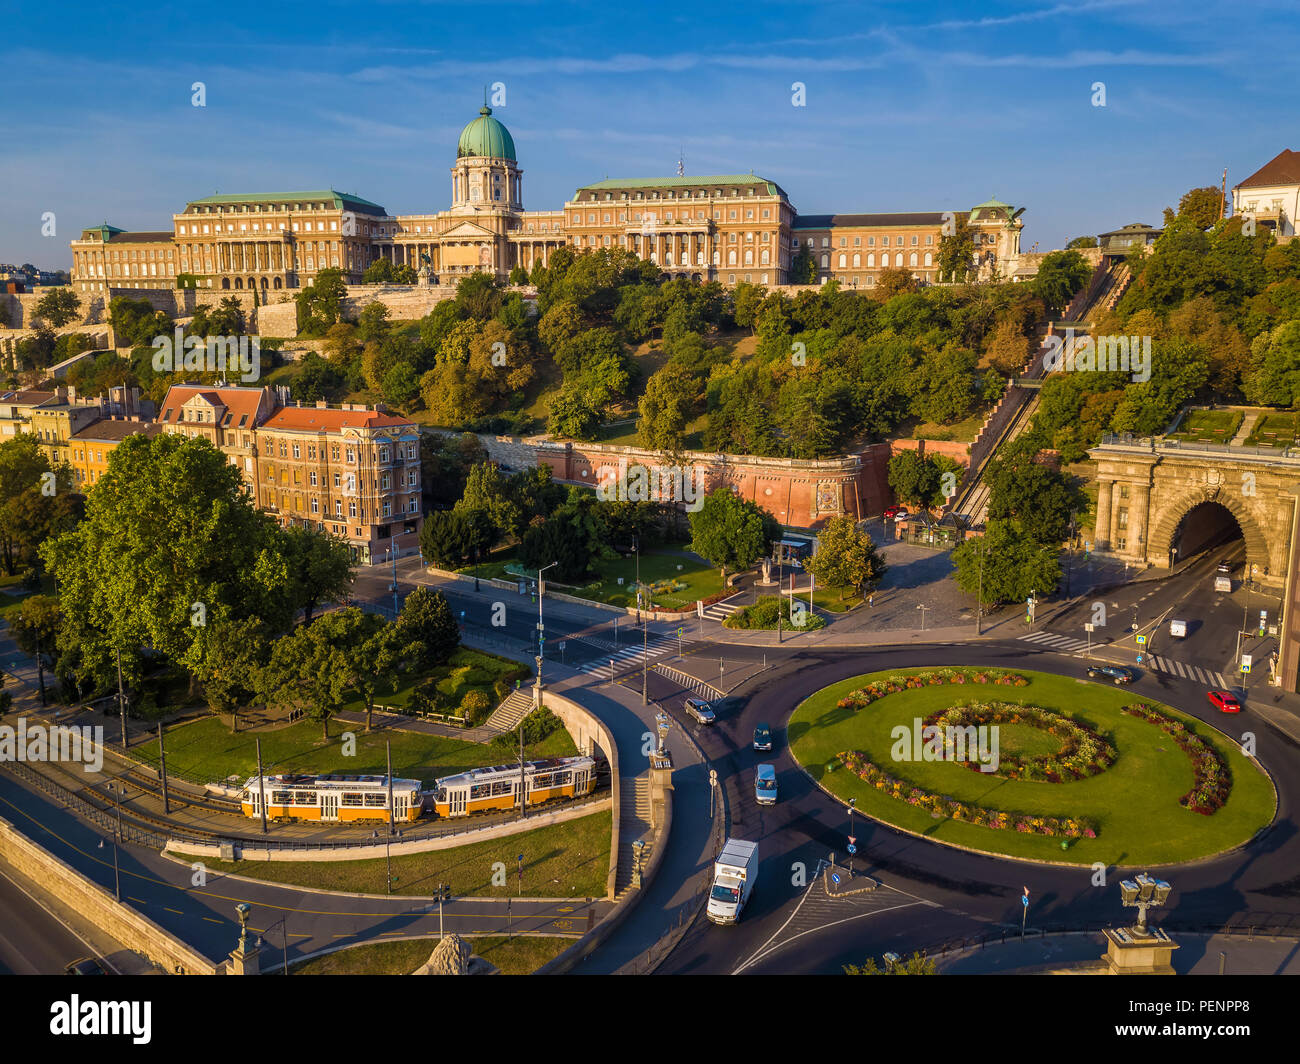 Budapest, Hungary - Clark Adam square roundabout from above at sunrise with Buda Castle Royal Palace and Tunnel and traditional yellow tram Stock Photo